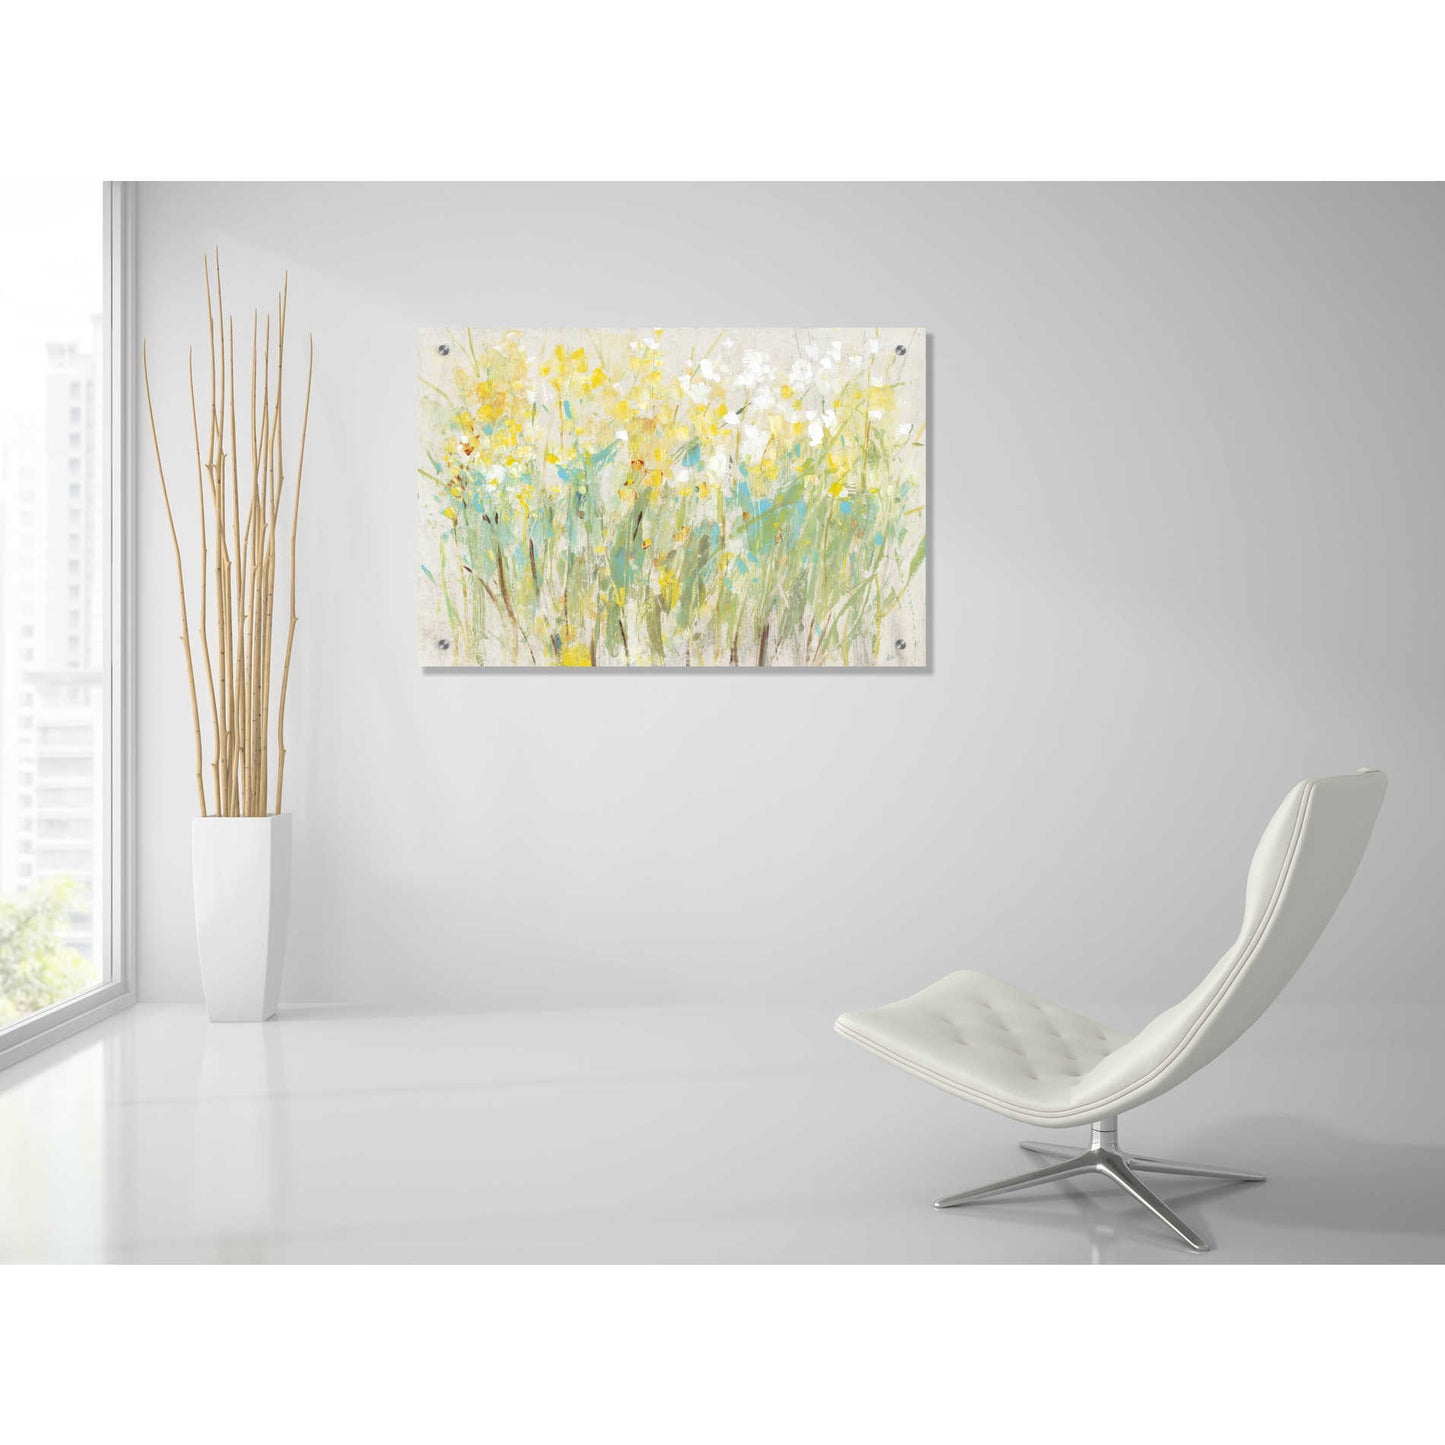 Epic Art 'Floral Cluster II' by Tim O'Toole, Acrylic Glass Wall Art,36x24